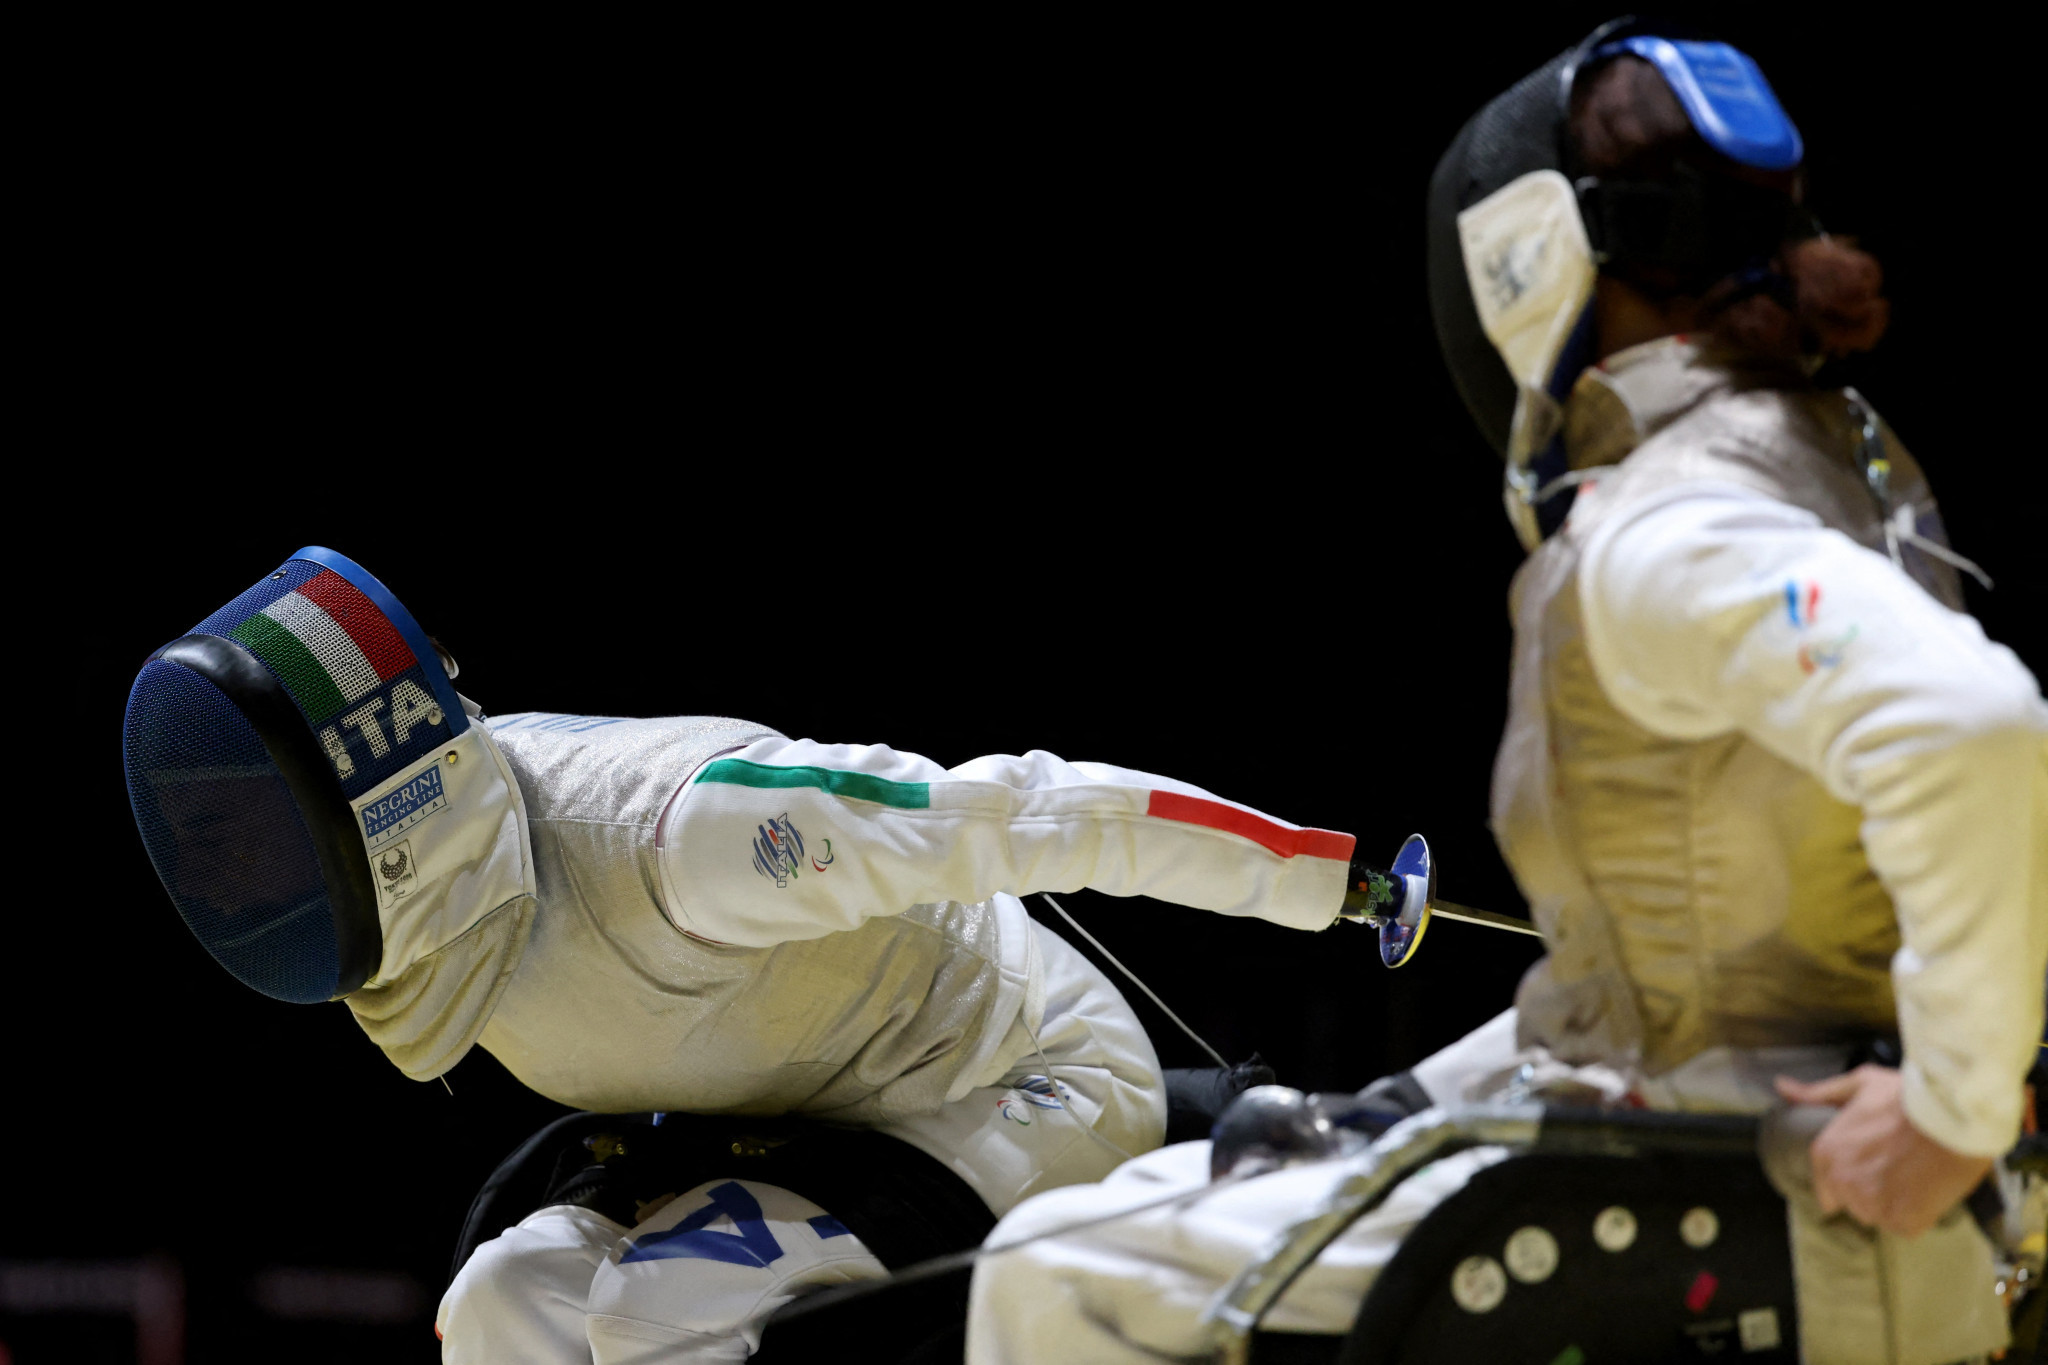 Italy end IWAS Wheelchair Fencing World Cup in São Paulo on top with six golds